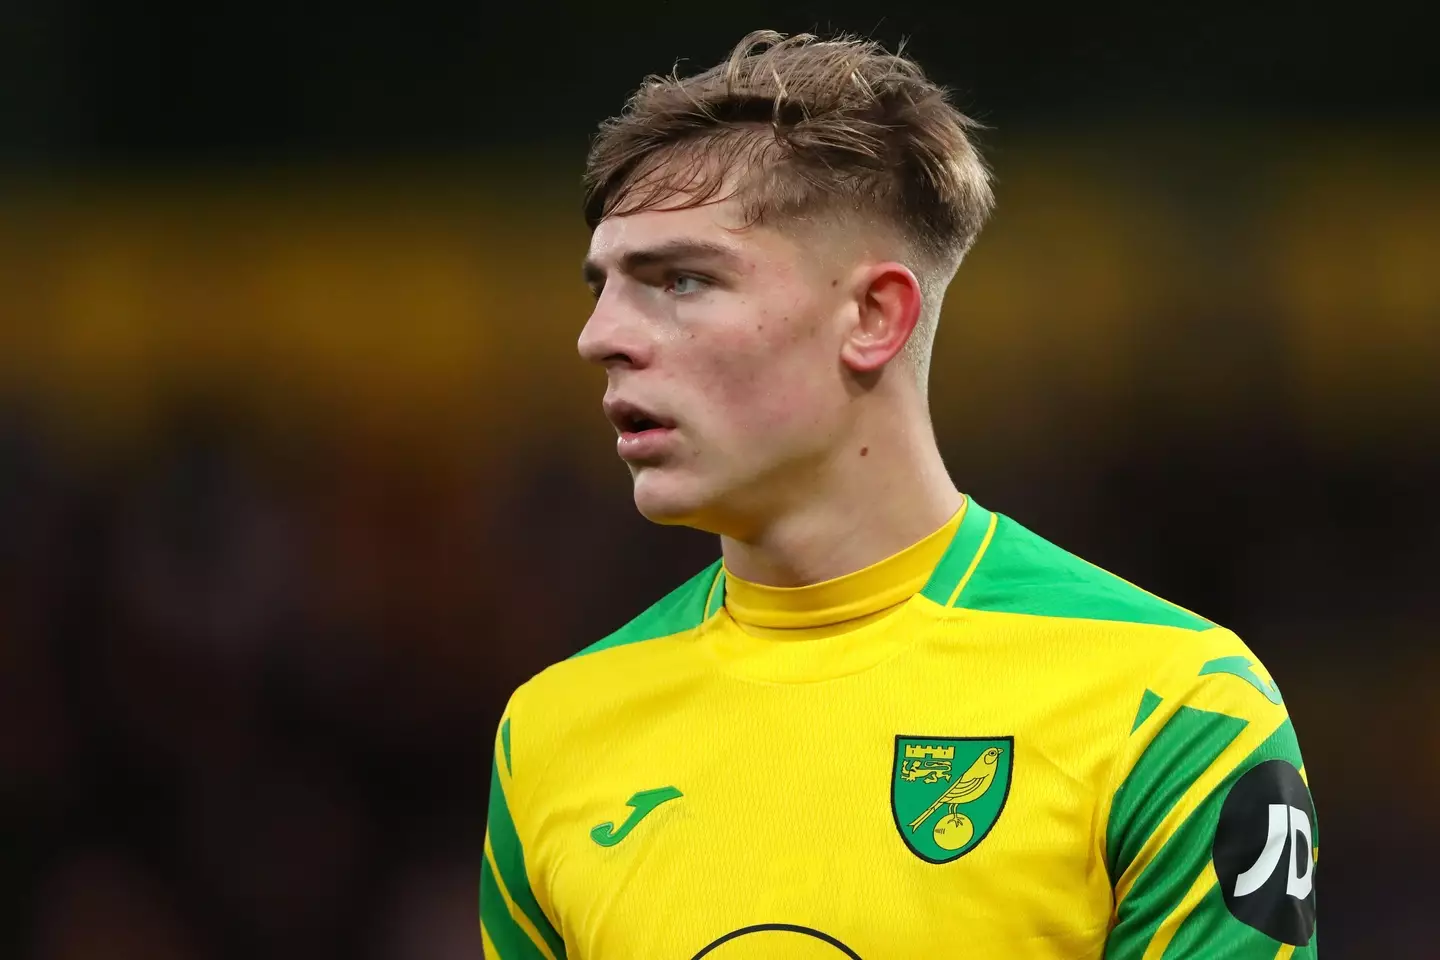 Williams has spent this season on loan at Norwich (Image: PA)